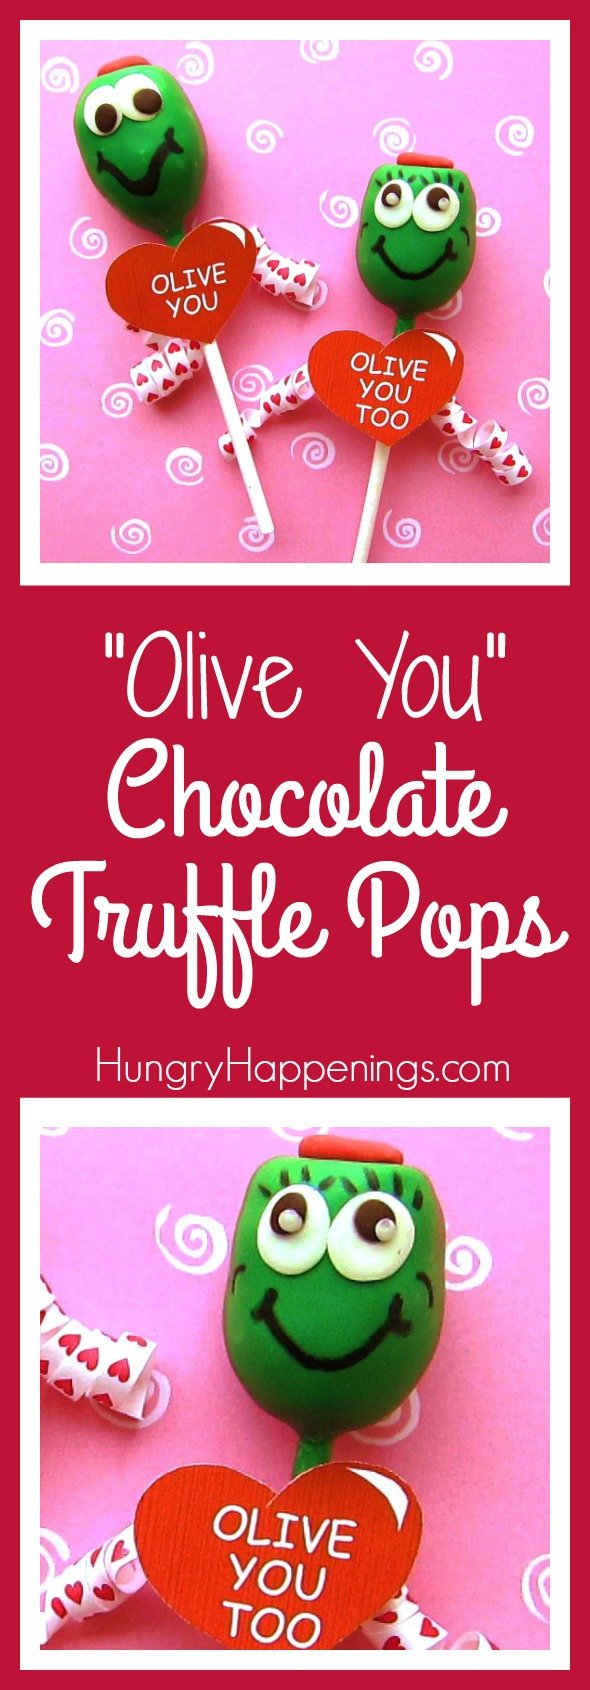 Be as punny as possible for Valentine's Day with these Chocolate Truffle Pops. They read "Olive You" but mean so much more when given to a loved one.